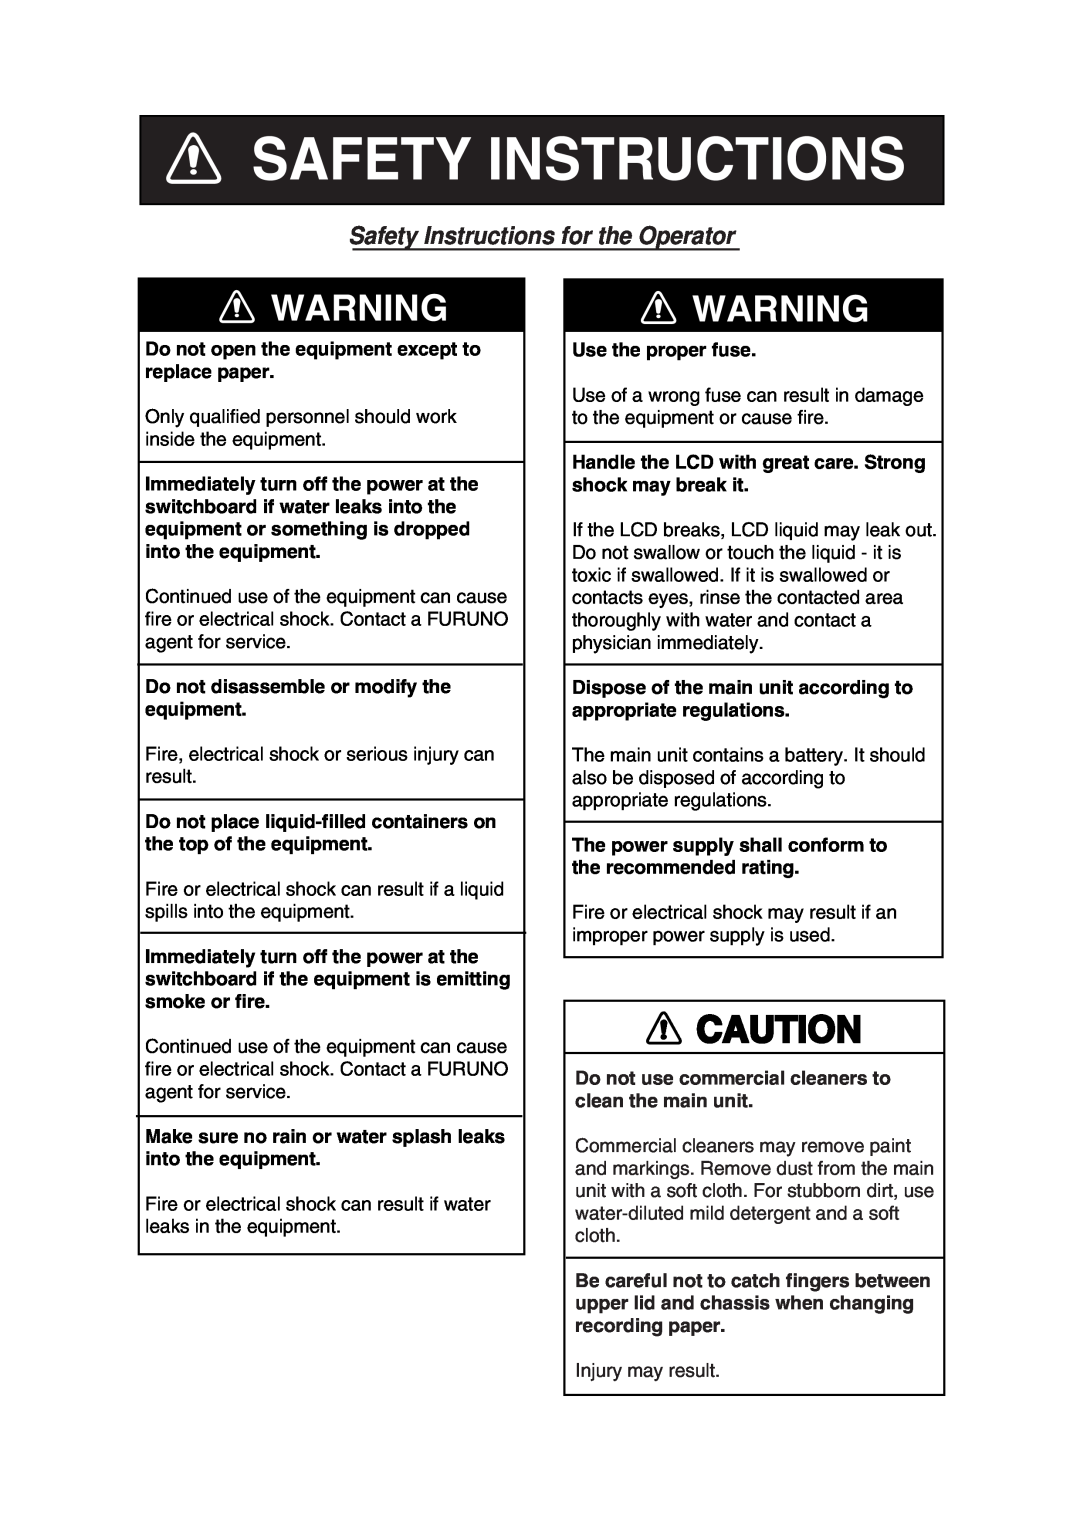 Furuno FAX-410 manual Safety Instructions for the Operator, Do not use commercial cleaners to clean the main unit 